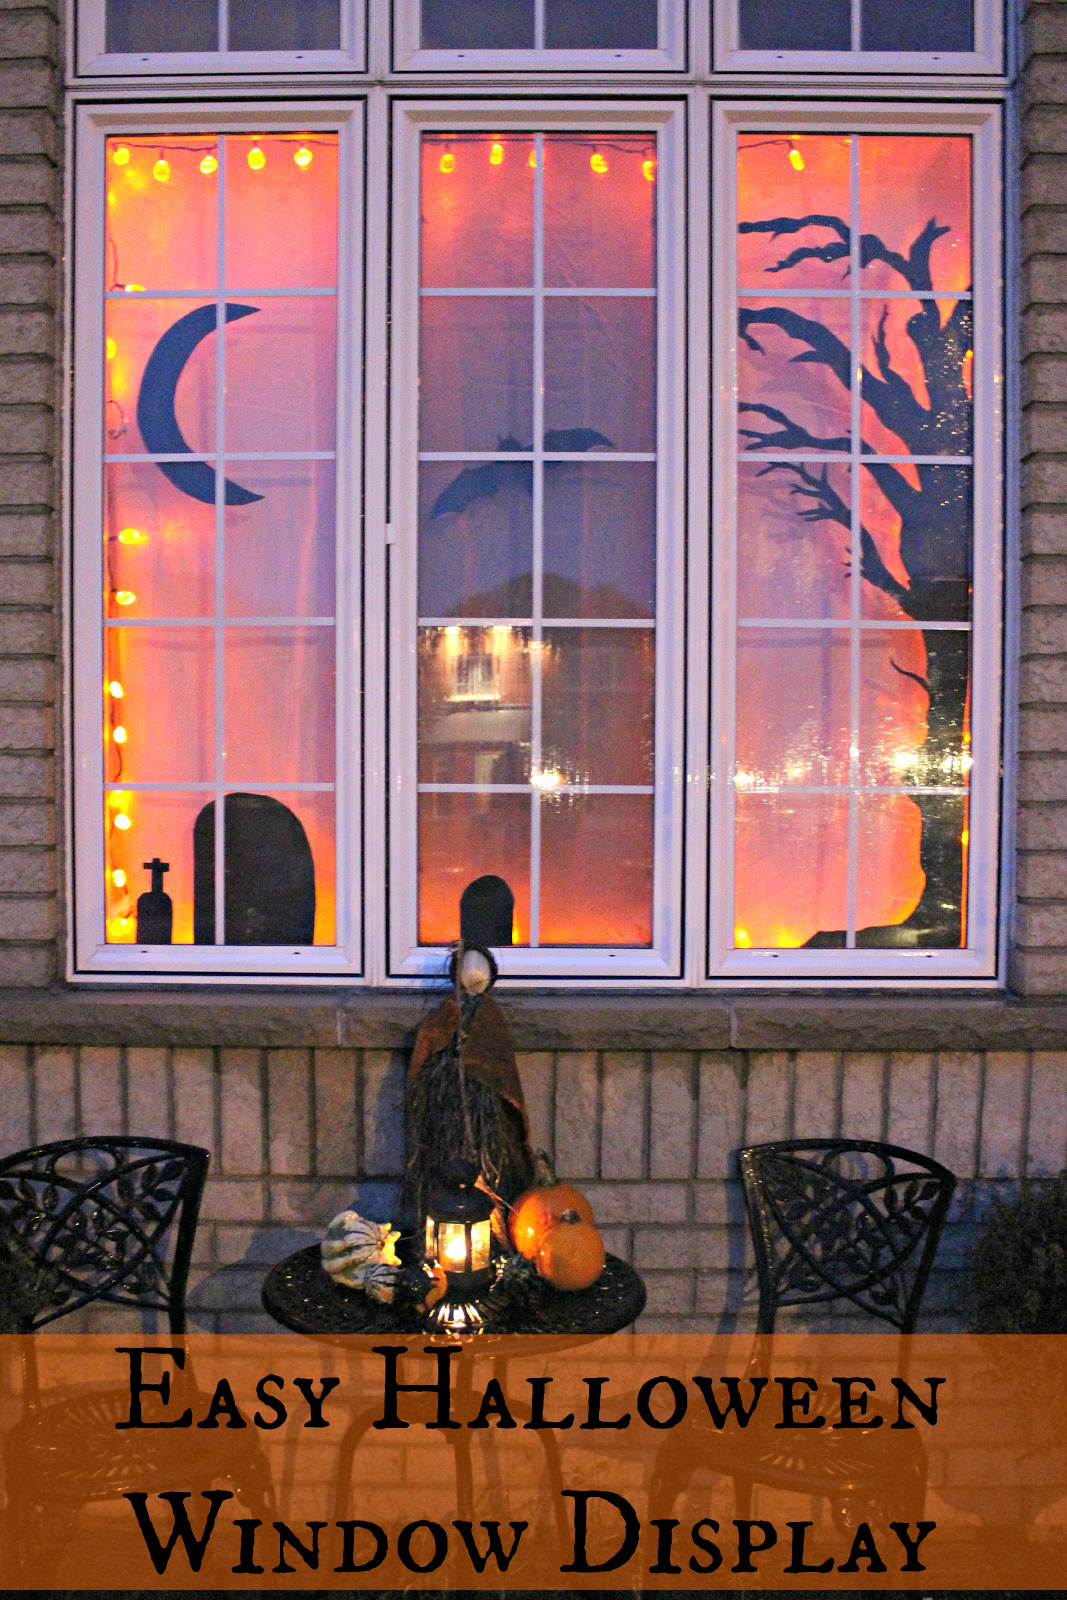 ideas to decorate windows with silhouettes on halloween